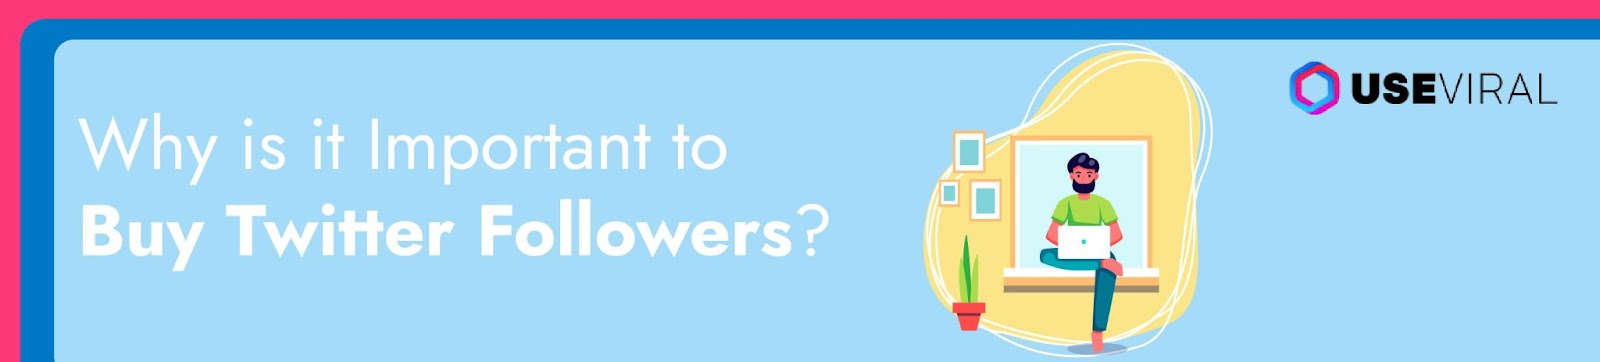 Why is it Important to Buy Twitter Followers?